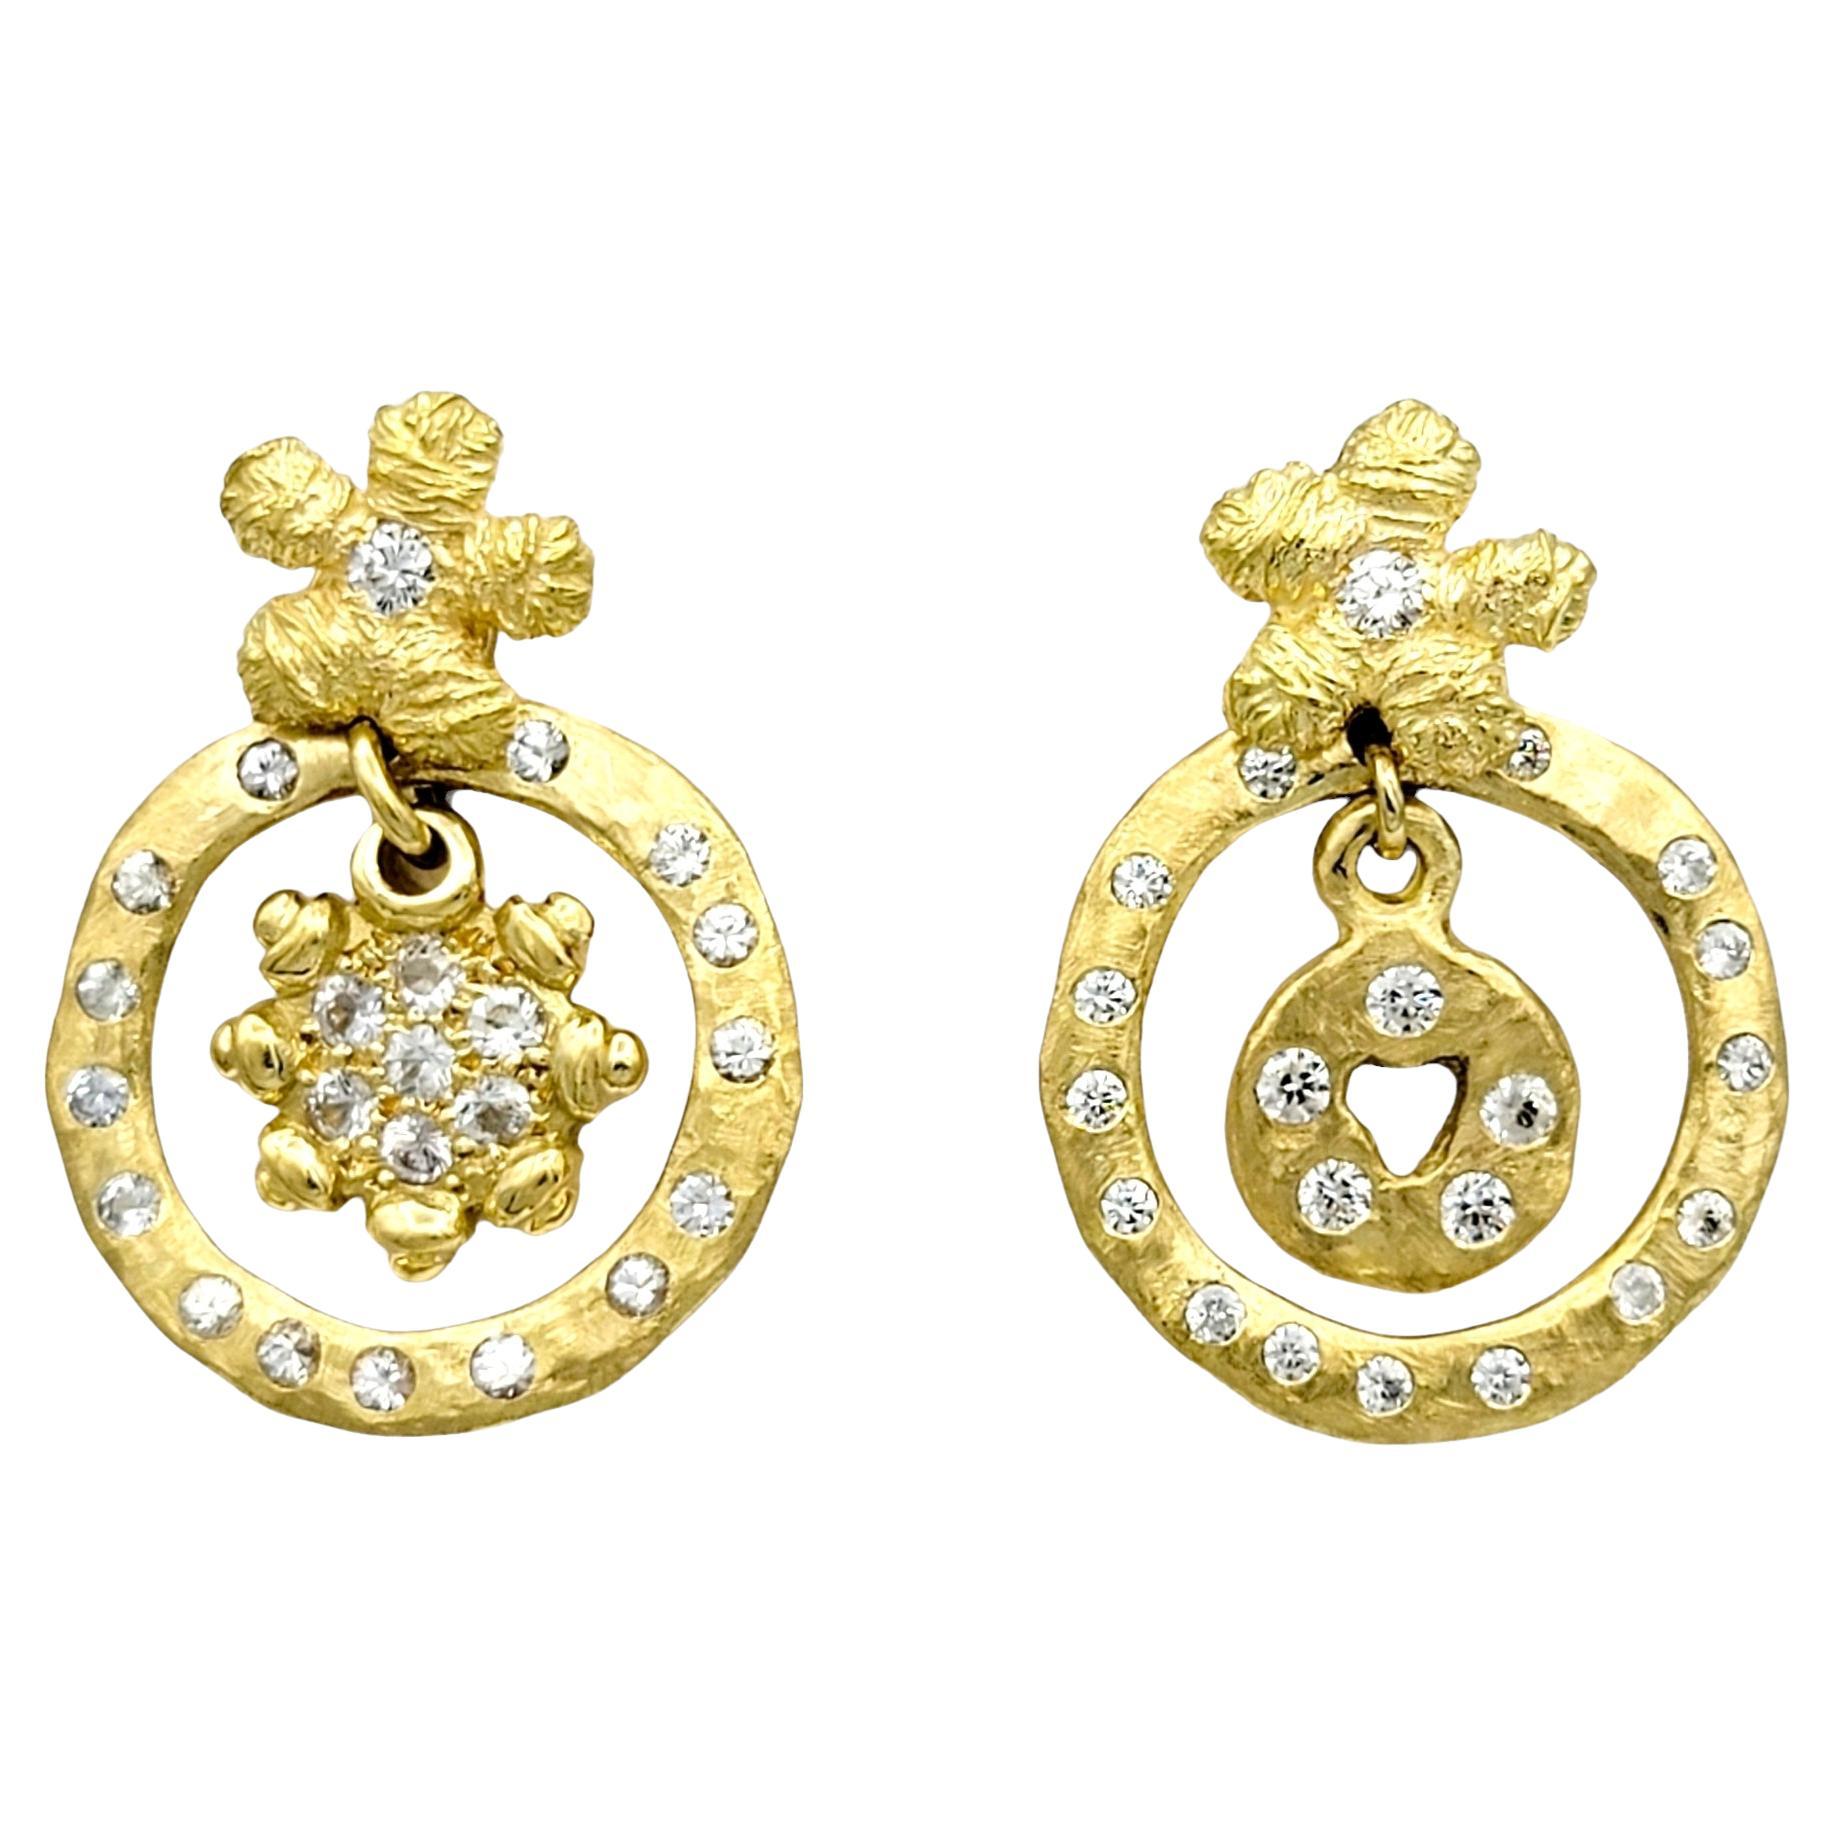 18 Karat Gold Diamond Flower Stud Earrings with Mismatched Hammered CZ Jackets For Sale